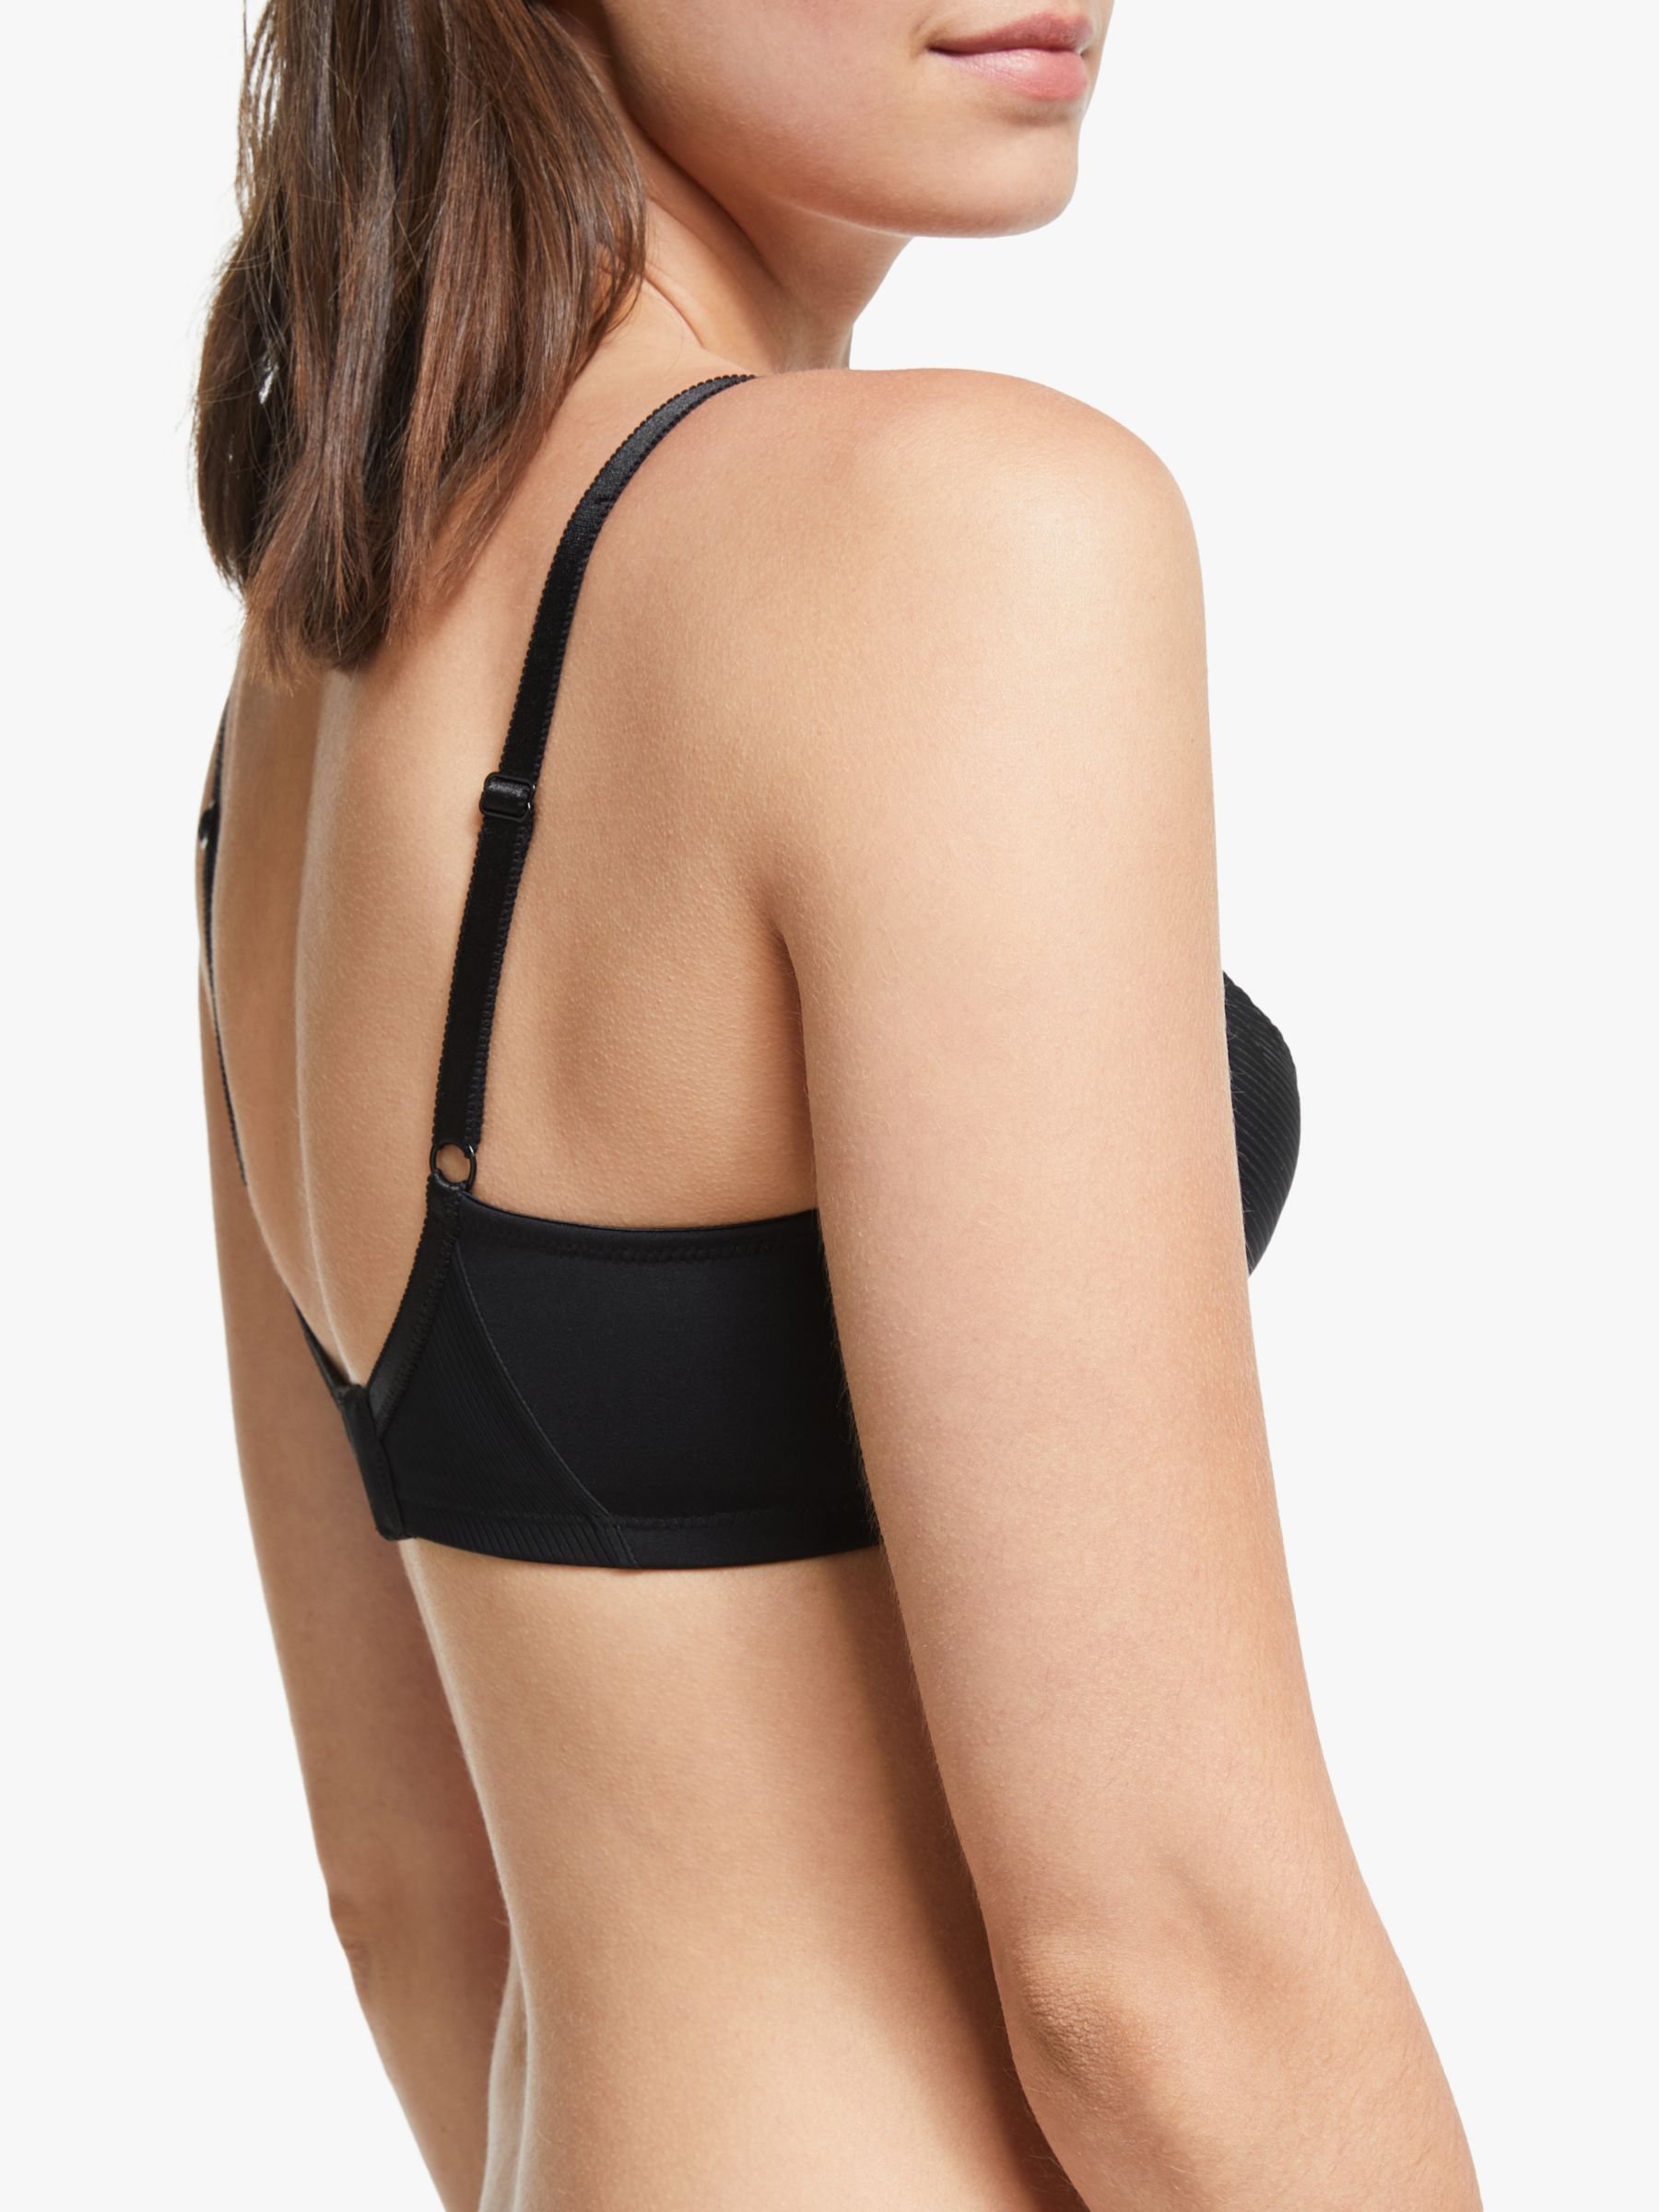 JOHN LEWIS Gentle Support Lily Non-Wired Bra in Black